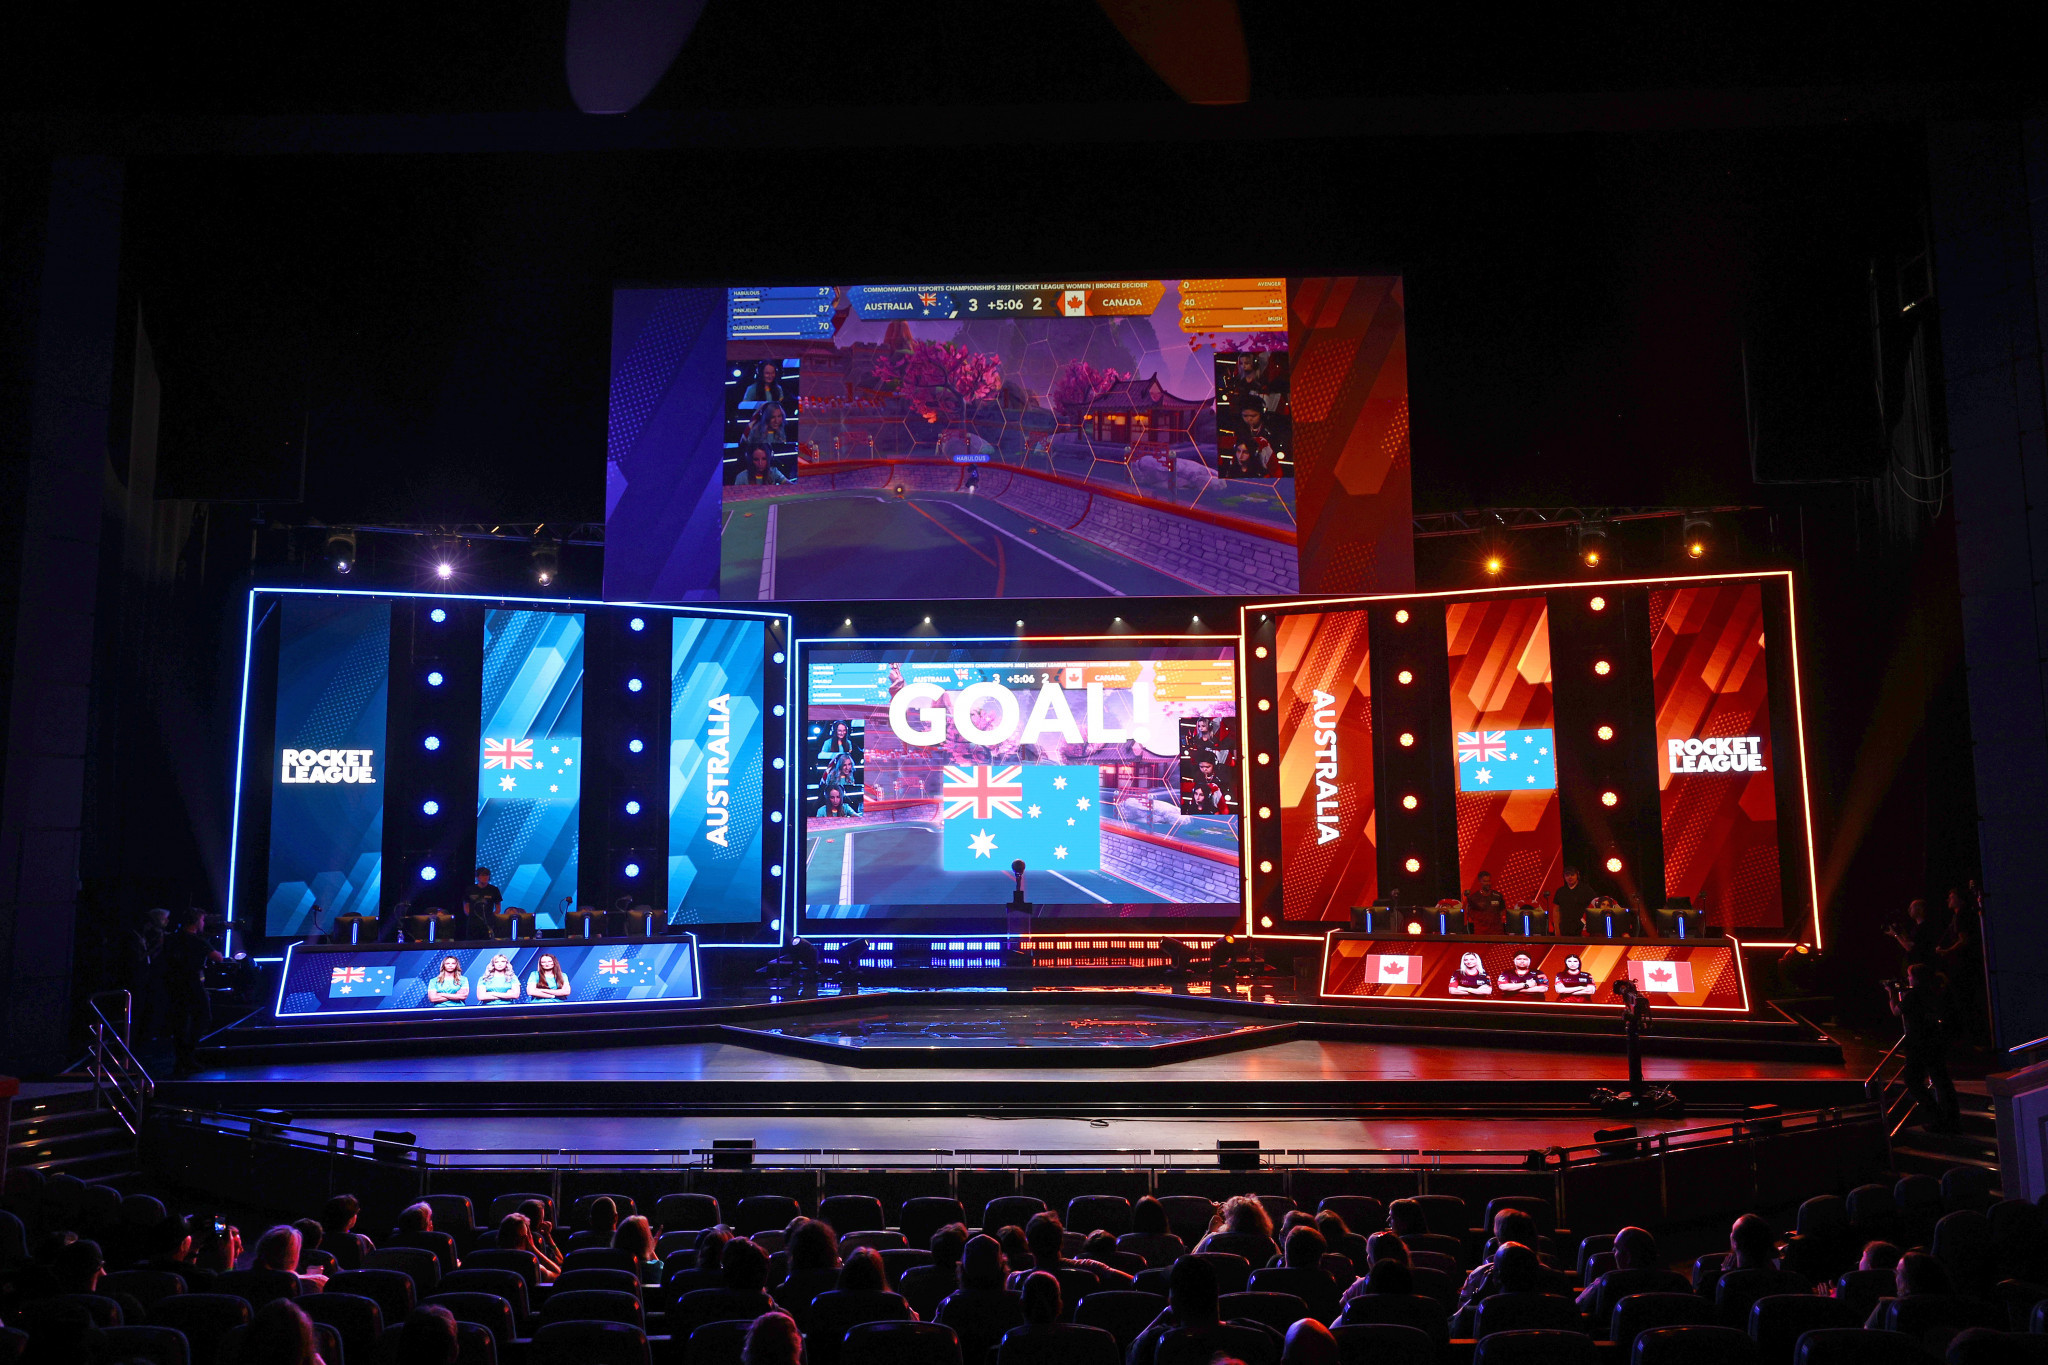 The esports event in Santiago is set to adopt a 